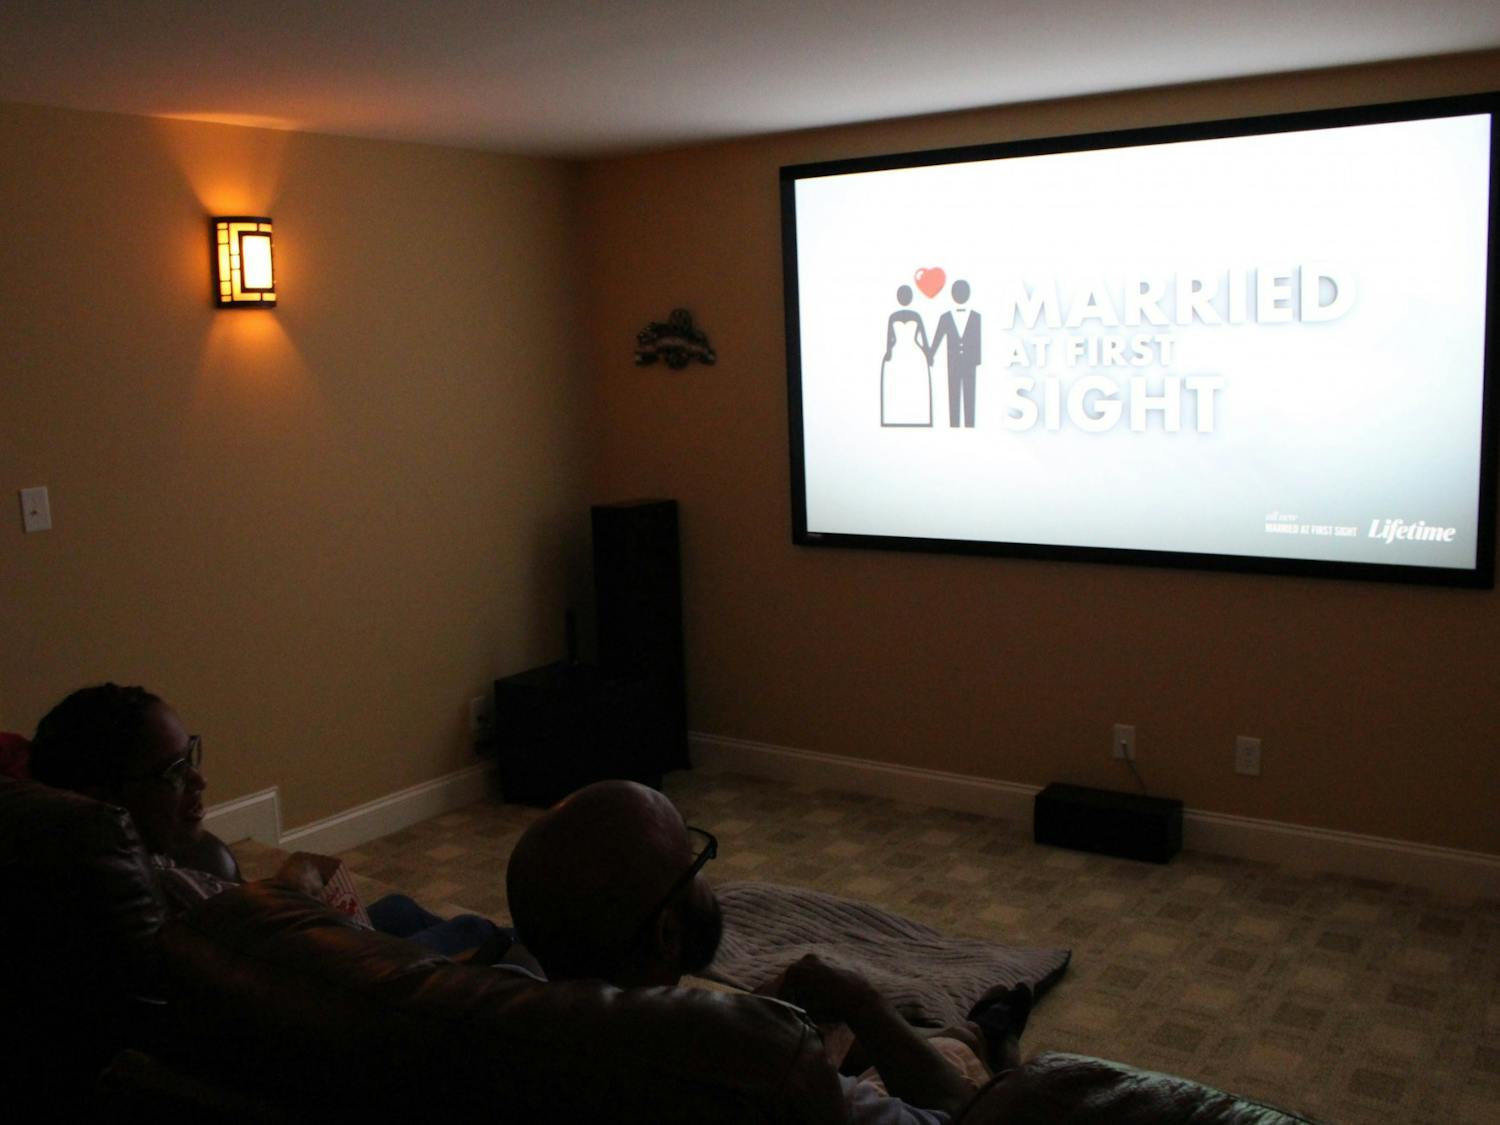 DTH Photo Illustration. People watch "Married at First Sight", a reality TV show on Lifetime TV. Over quarantine, many people have turned to various dating shows to stay entertained.